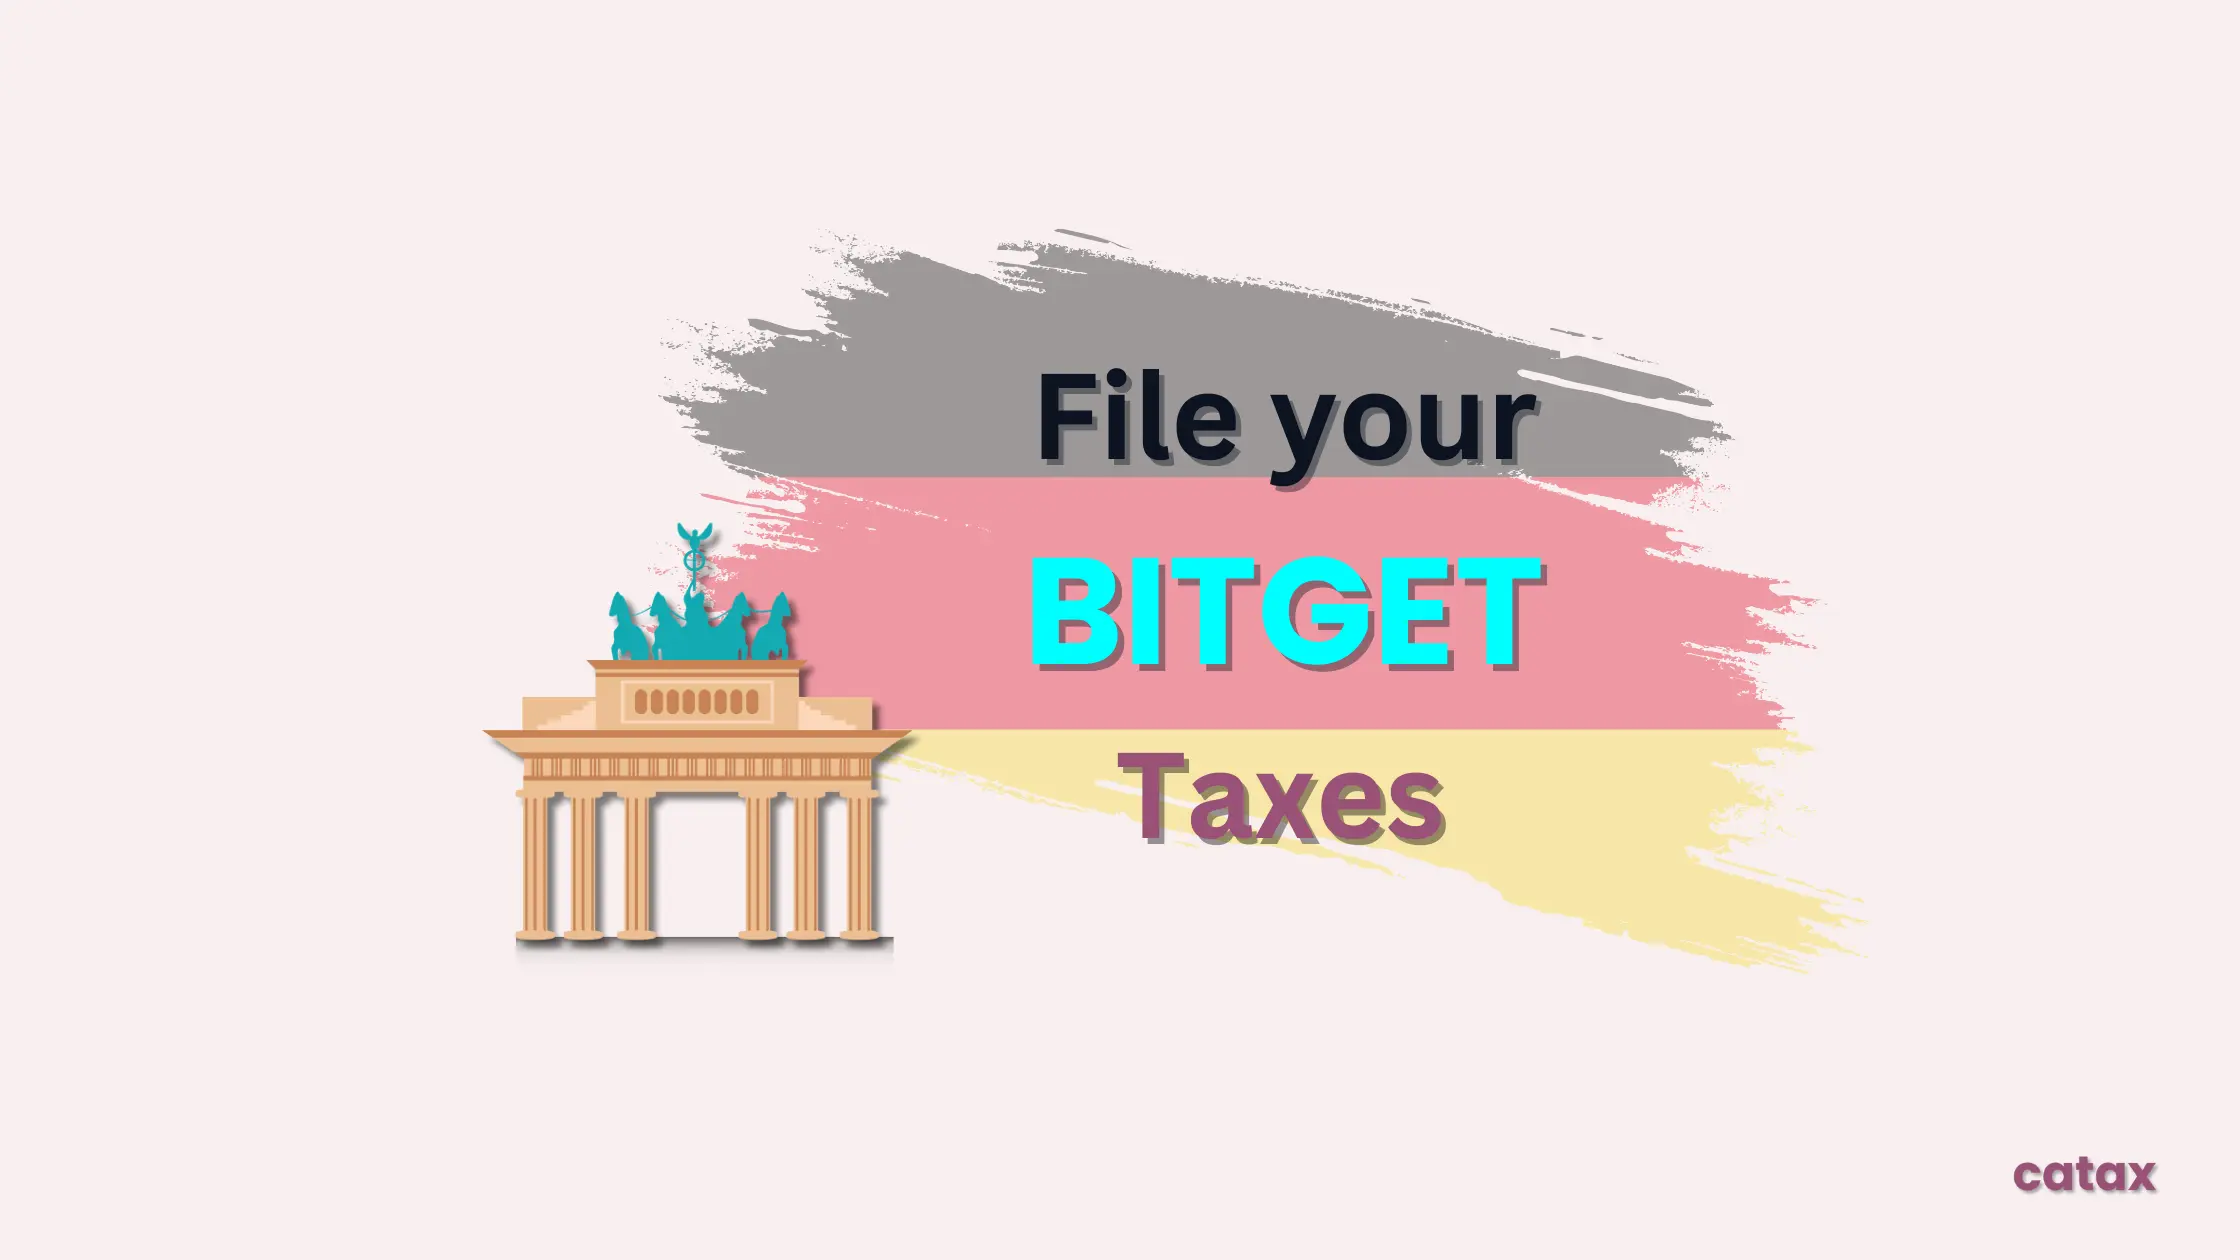 How to File Bitget Taxes in Germany?